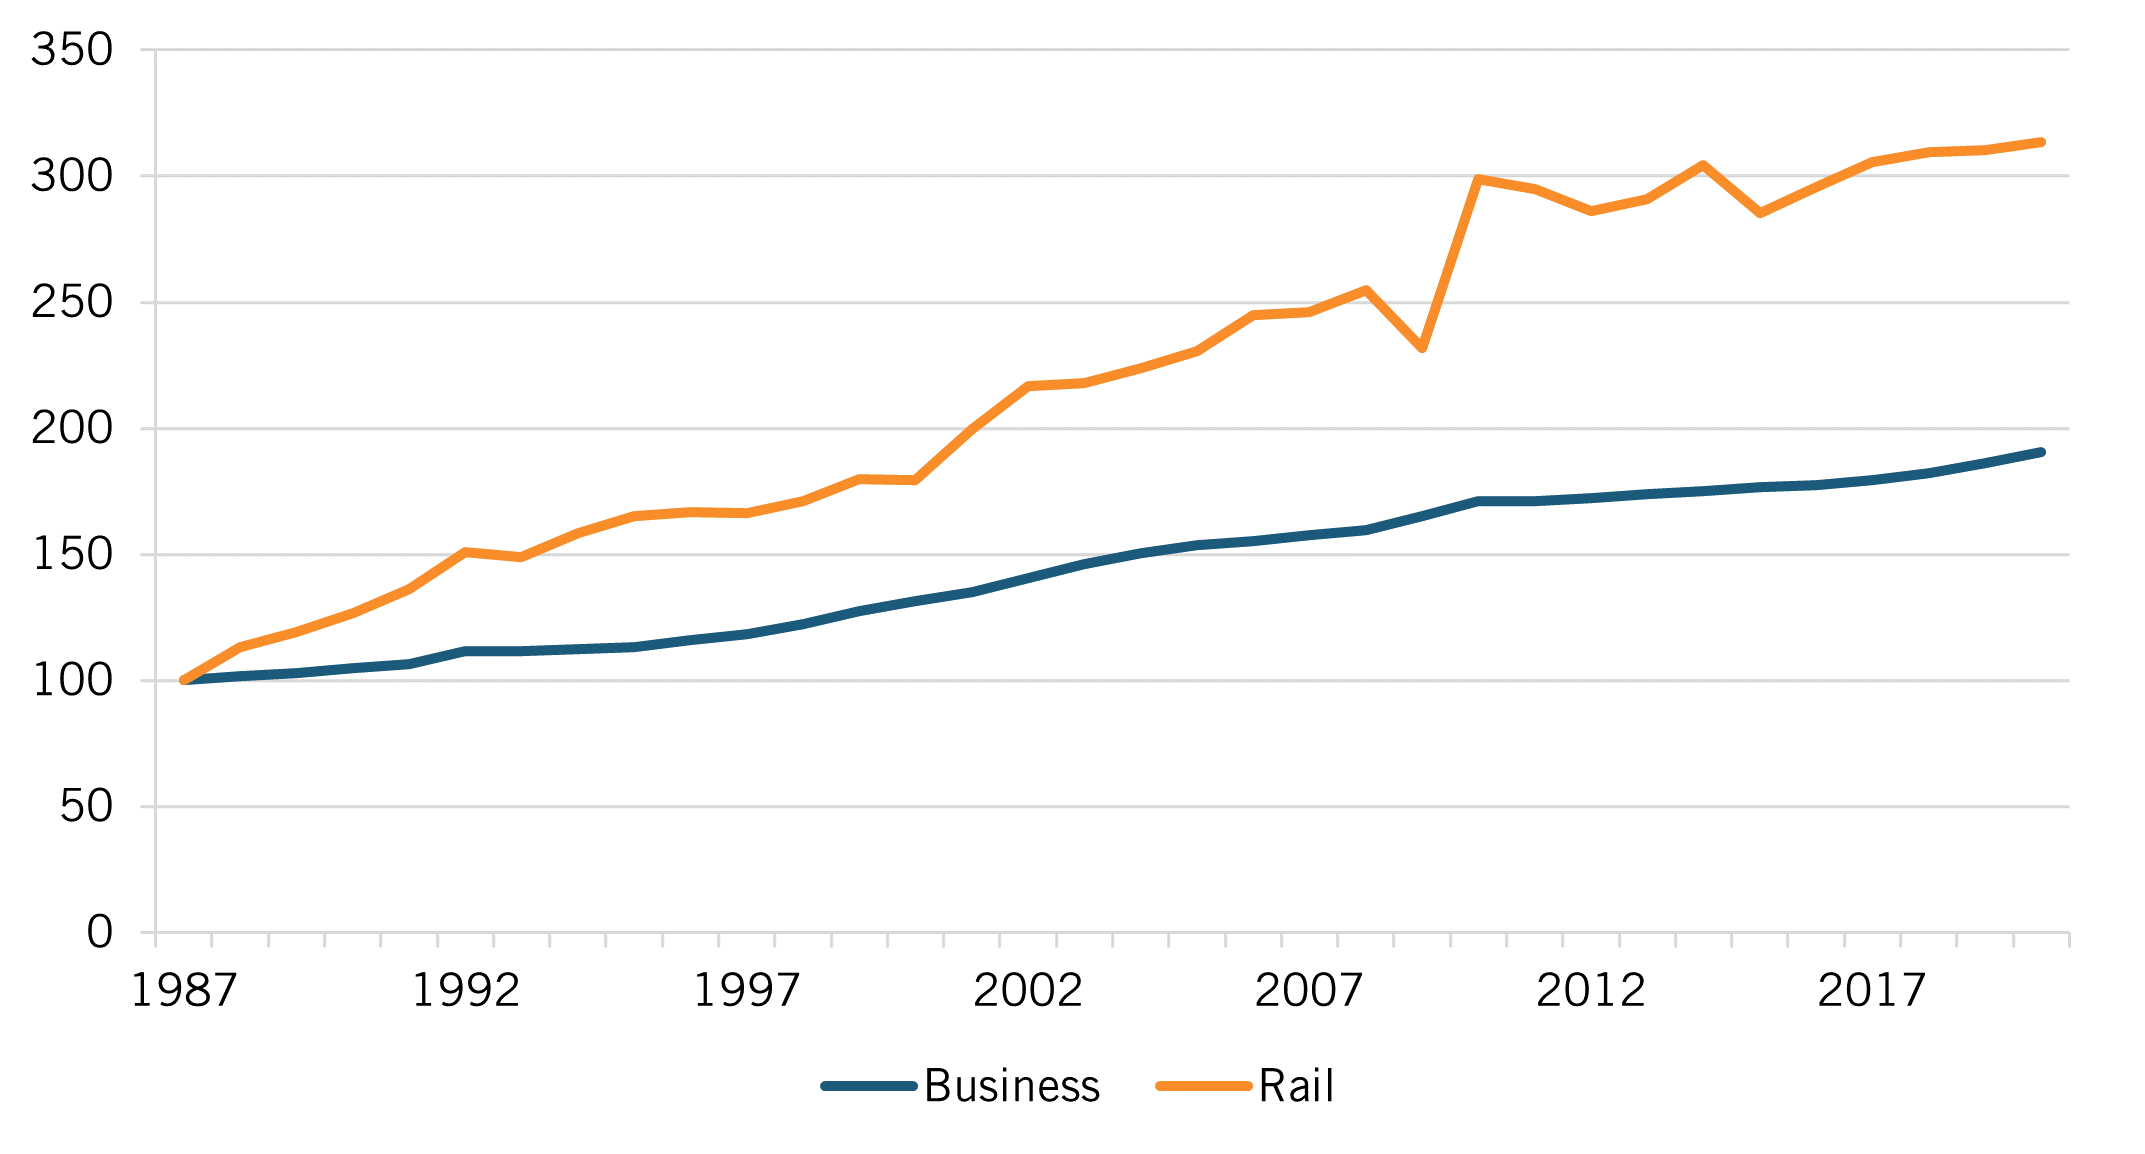 U.S. labor productivity growth for the rail industry and business sector